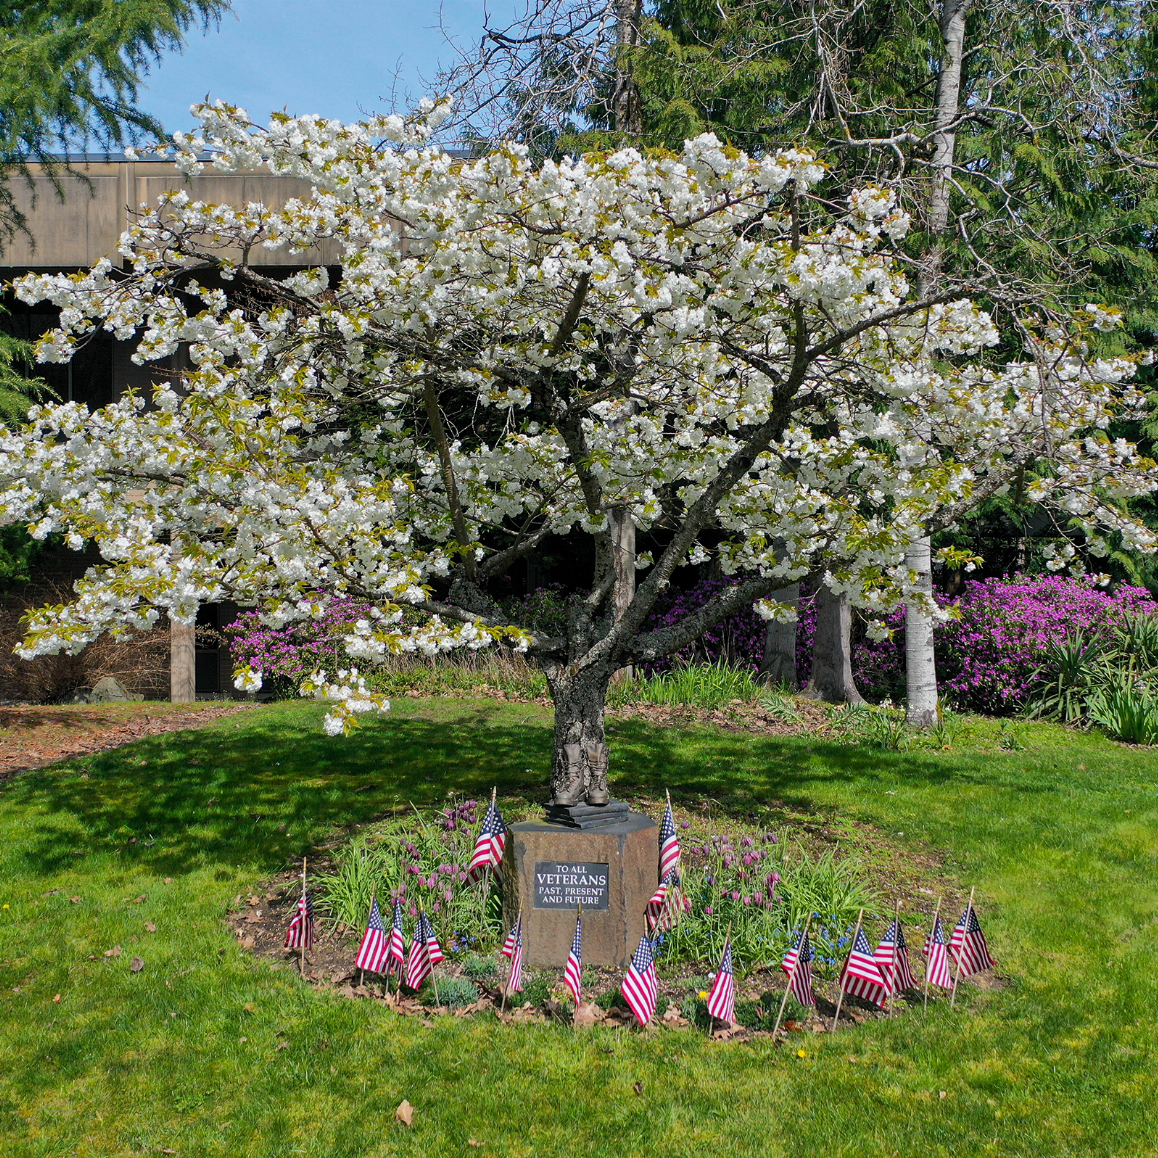 Assembly of the Battlefield Cross and a wreath-laying ceremony at the Boots to Books Monument will be held during the Memorial Day Ceremony at Edmonds College on May 26.